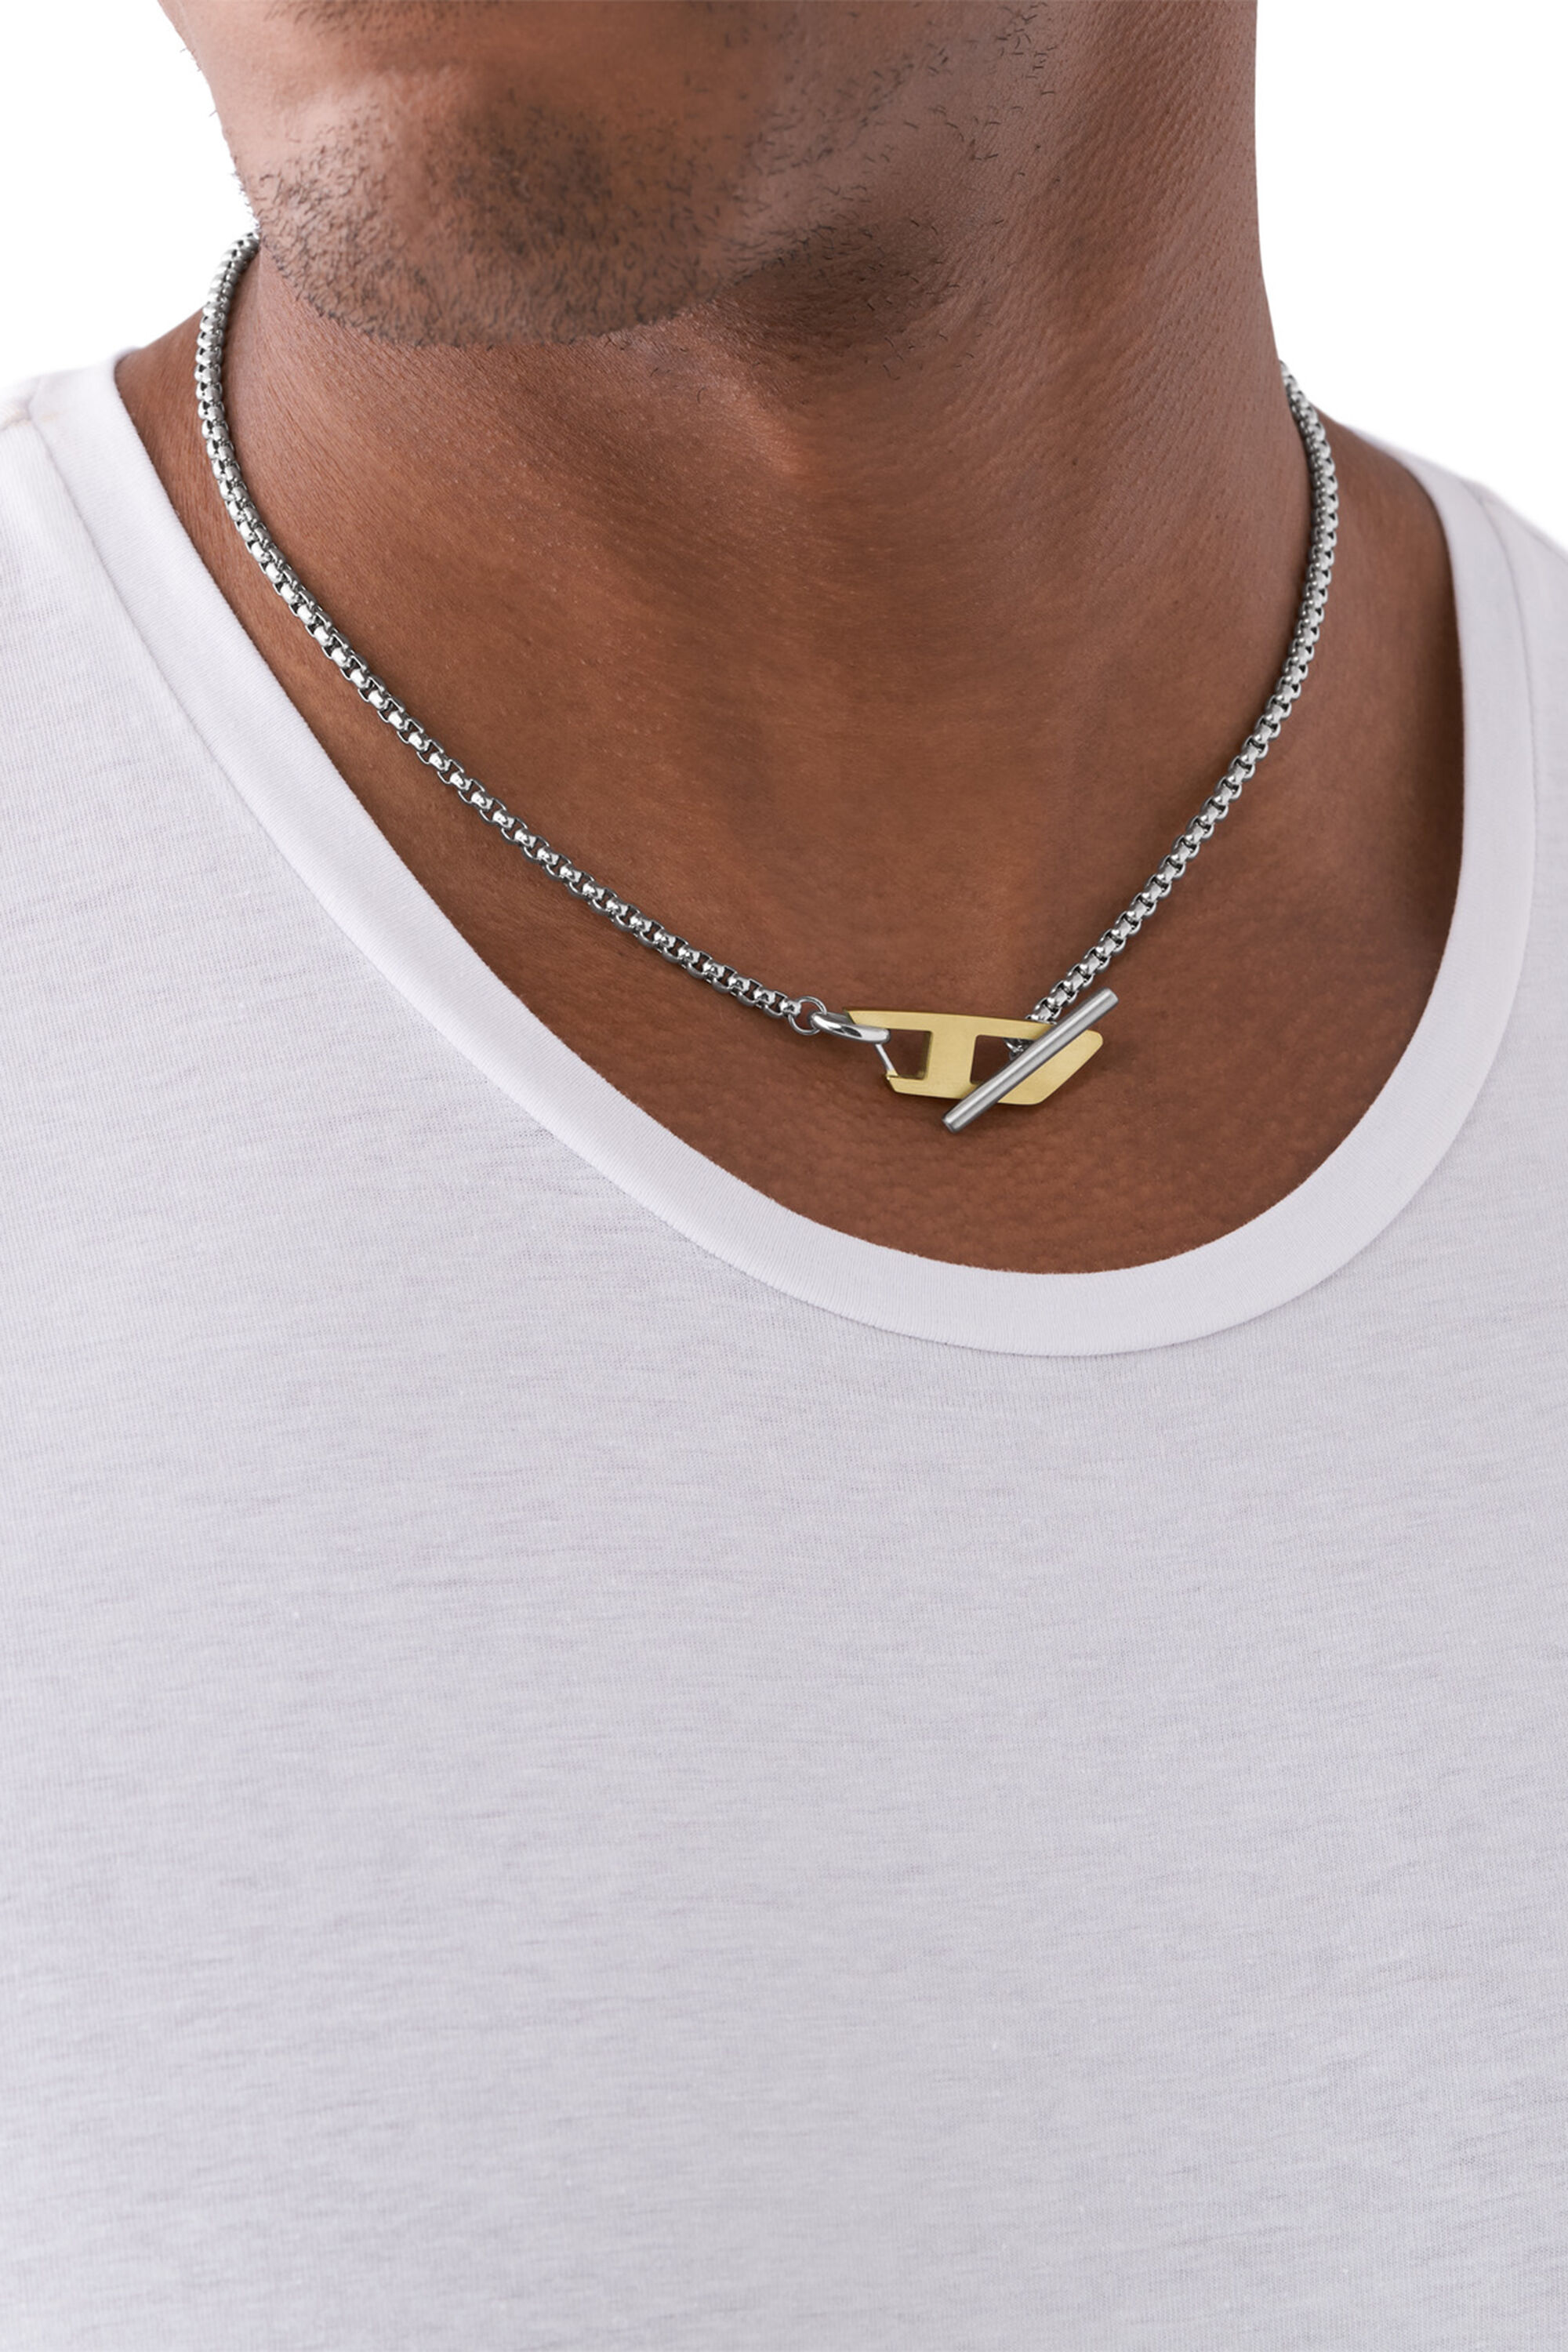 DX1378: Two-Tone Stainless Steel Choker Necklace | Diesel